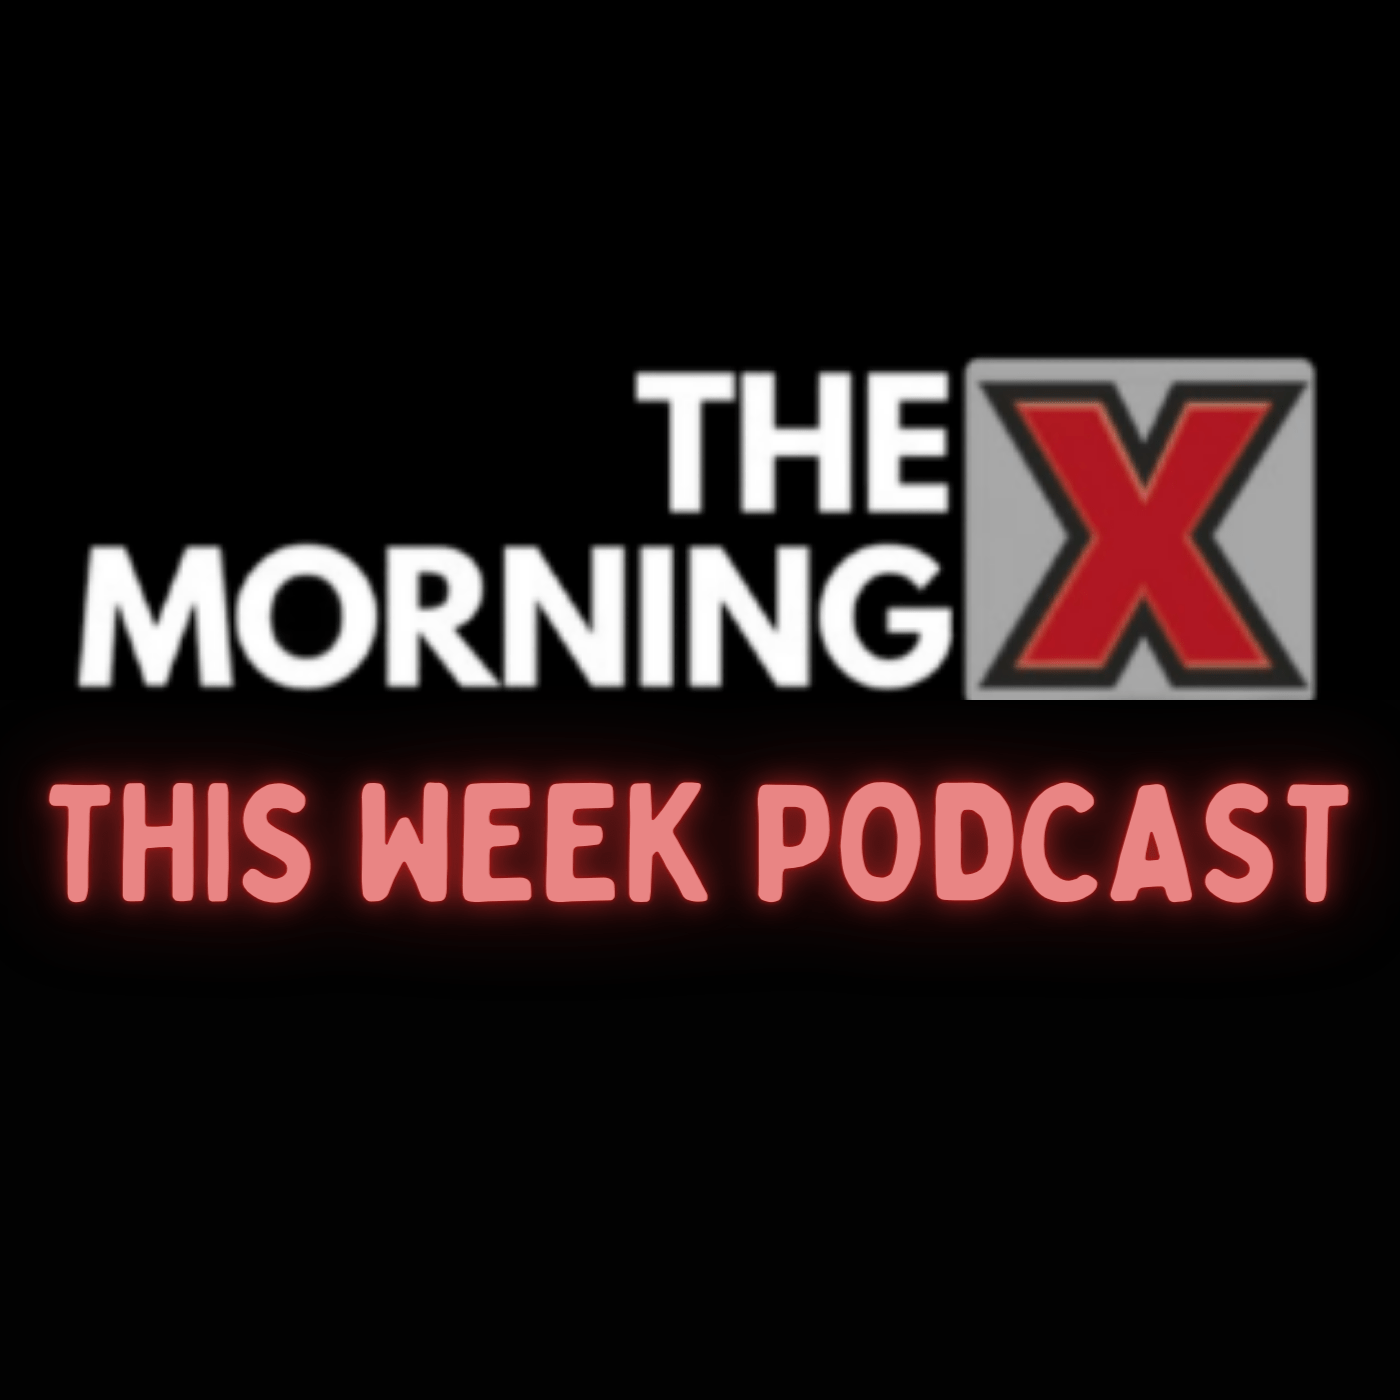 The Morning X This Week Podcast